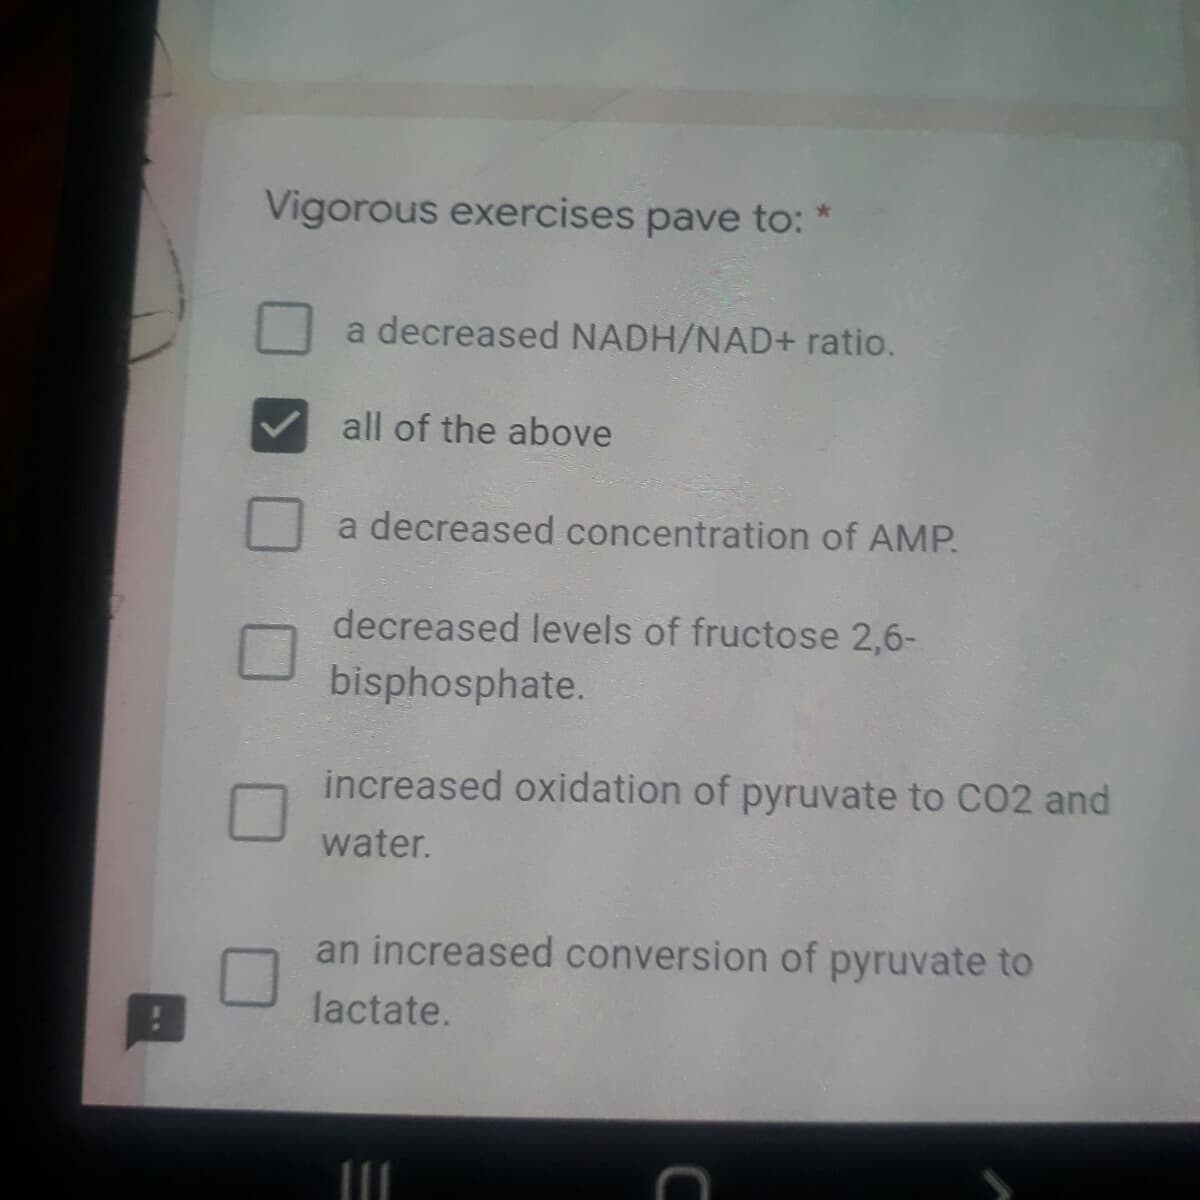 Vigorous exercises pave to: *
a decreased NADH/NAD+ ratio.
all of the above
a decreased concentration of AMP.
decreased levels of fructose 2,6-
bisphosphate.
increased oxidation of pyruvate to CO2 and
water.
an increased conversion of pyruvate to
lactate.
